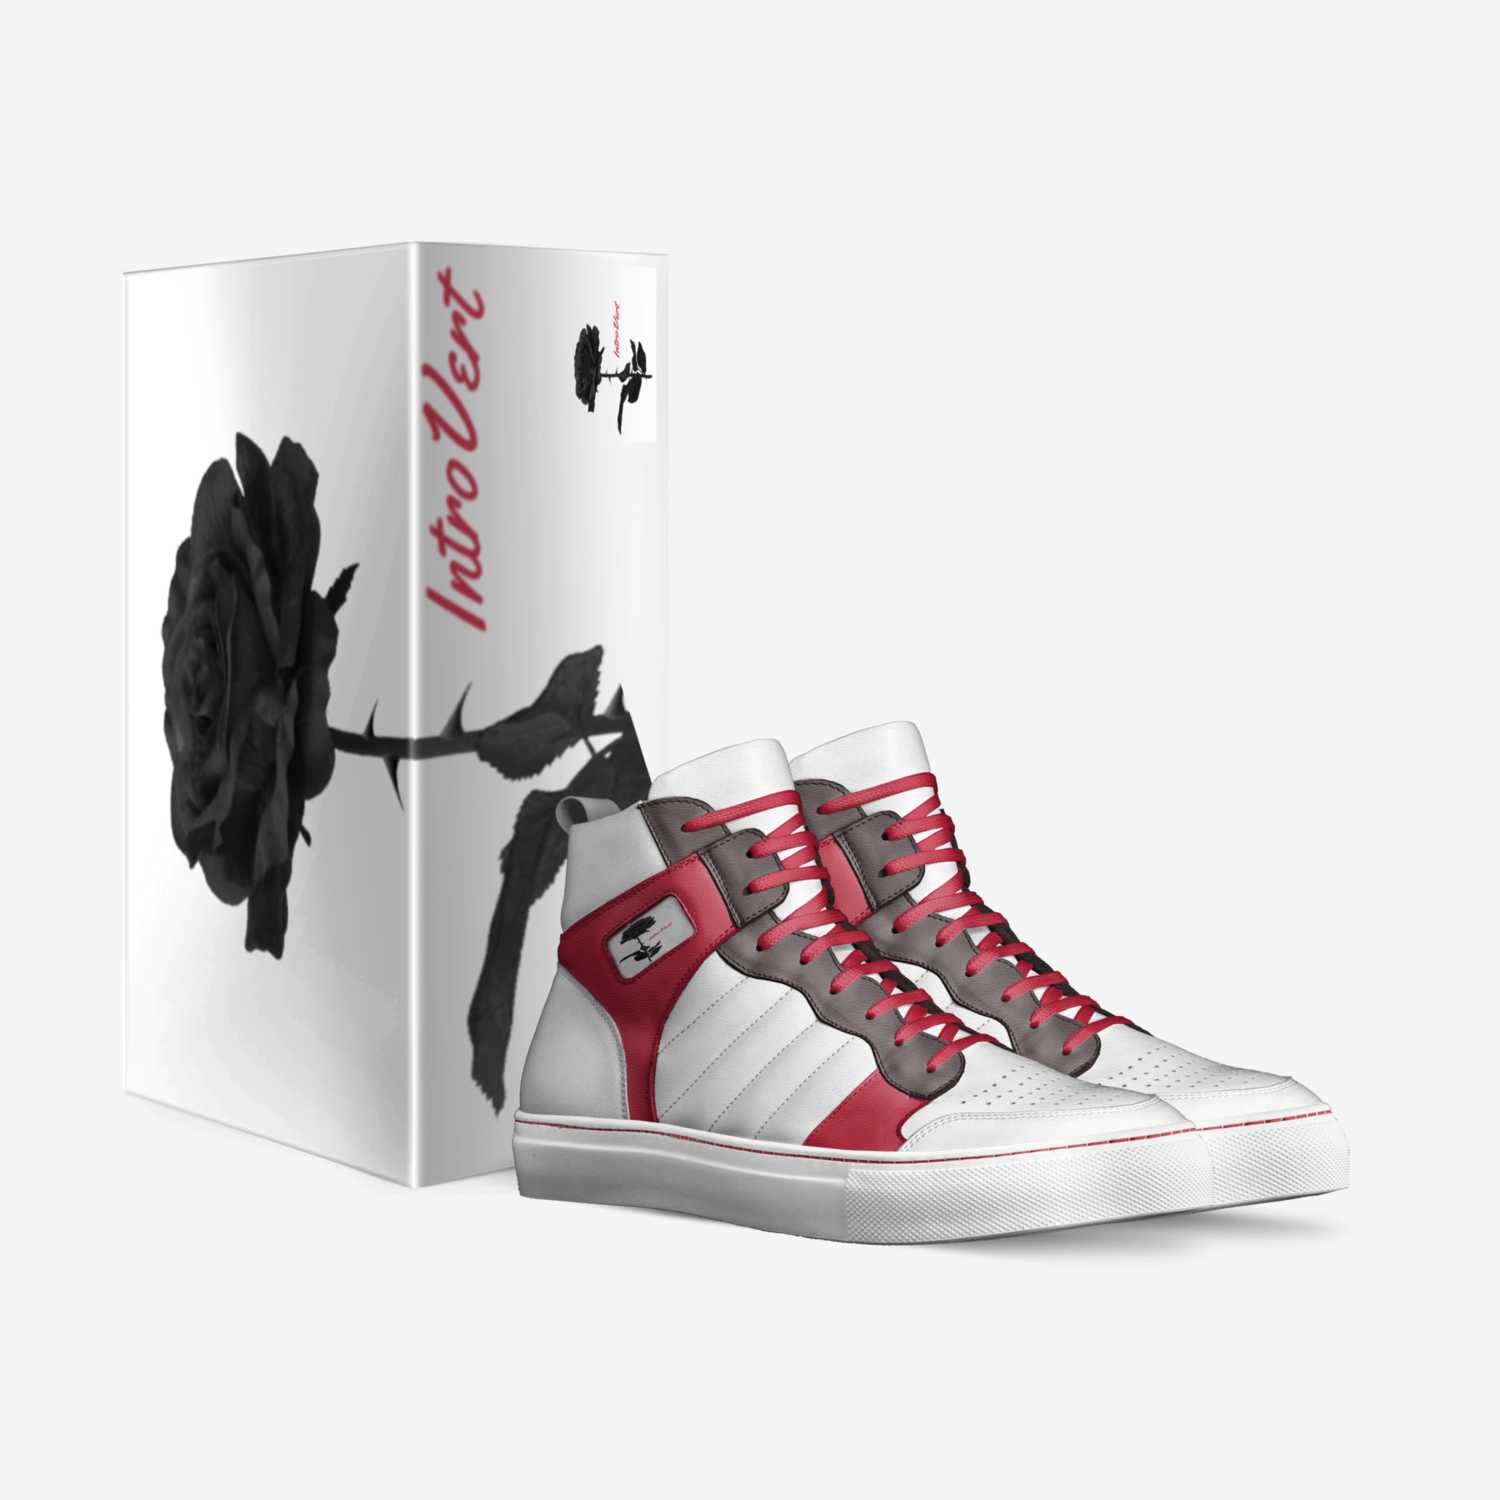 IntroVert by DomD | A Custom Shoe concept by Dustin Stogner